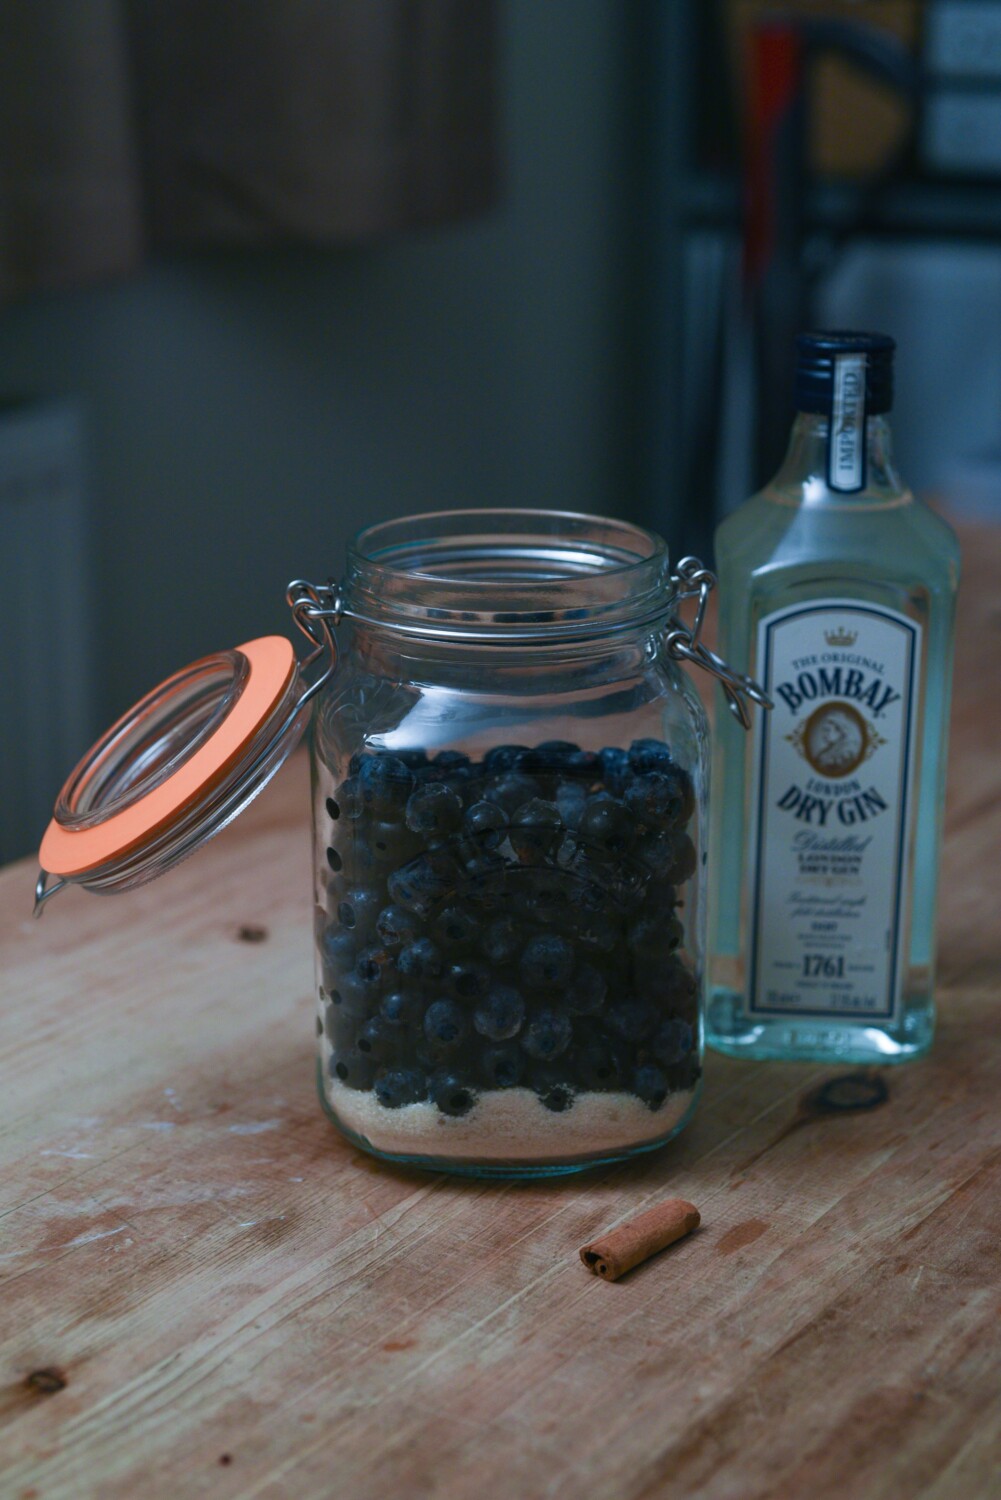 A picture of gooseberries and sloe gin making in a jam jar next to a bottle of gin on a table